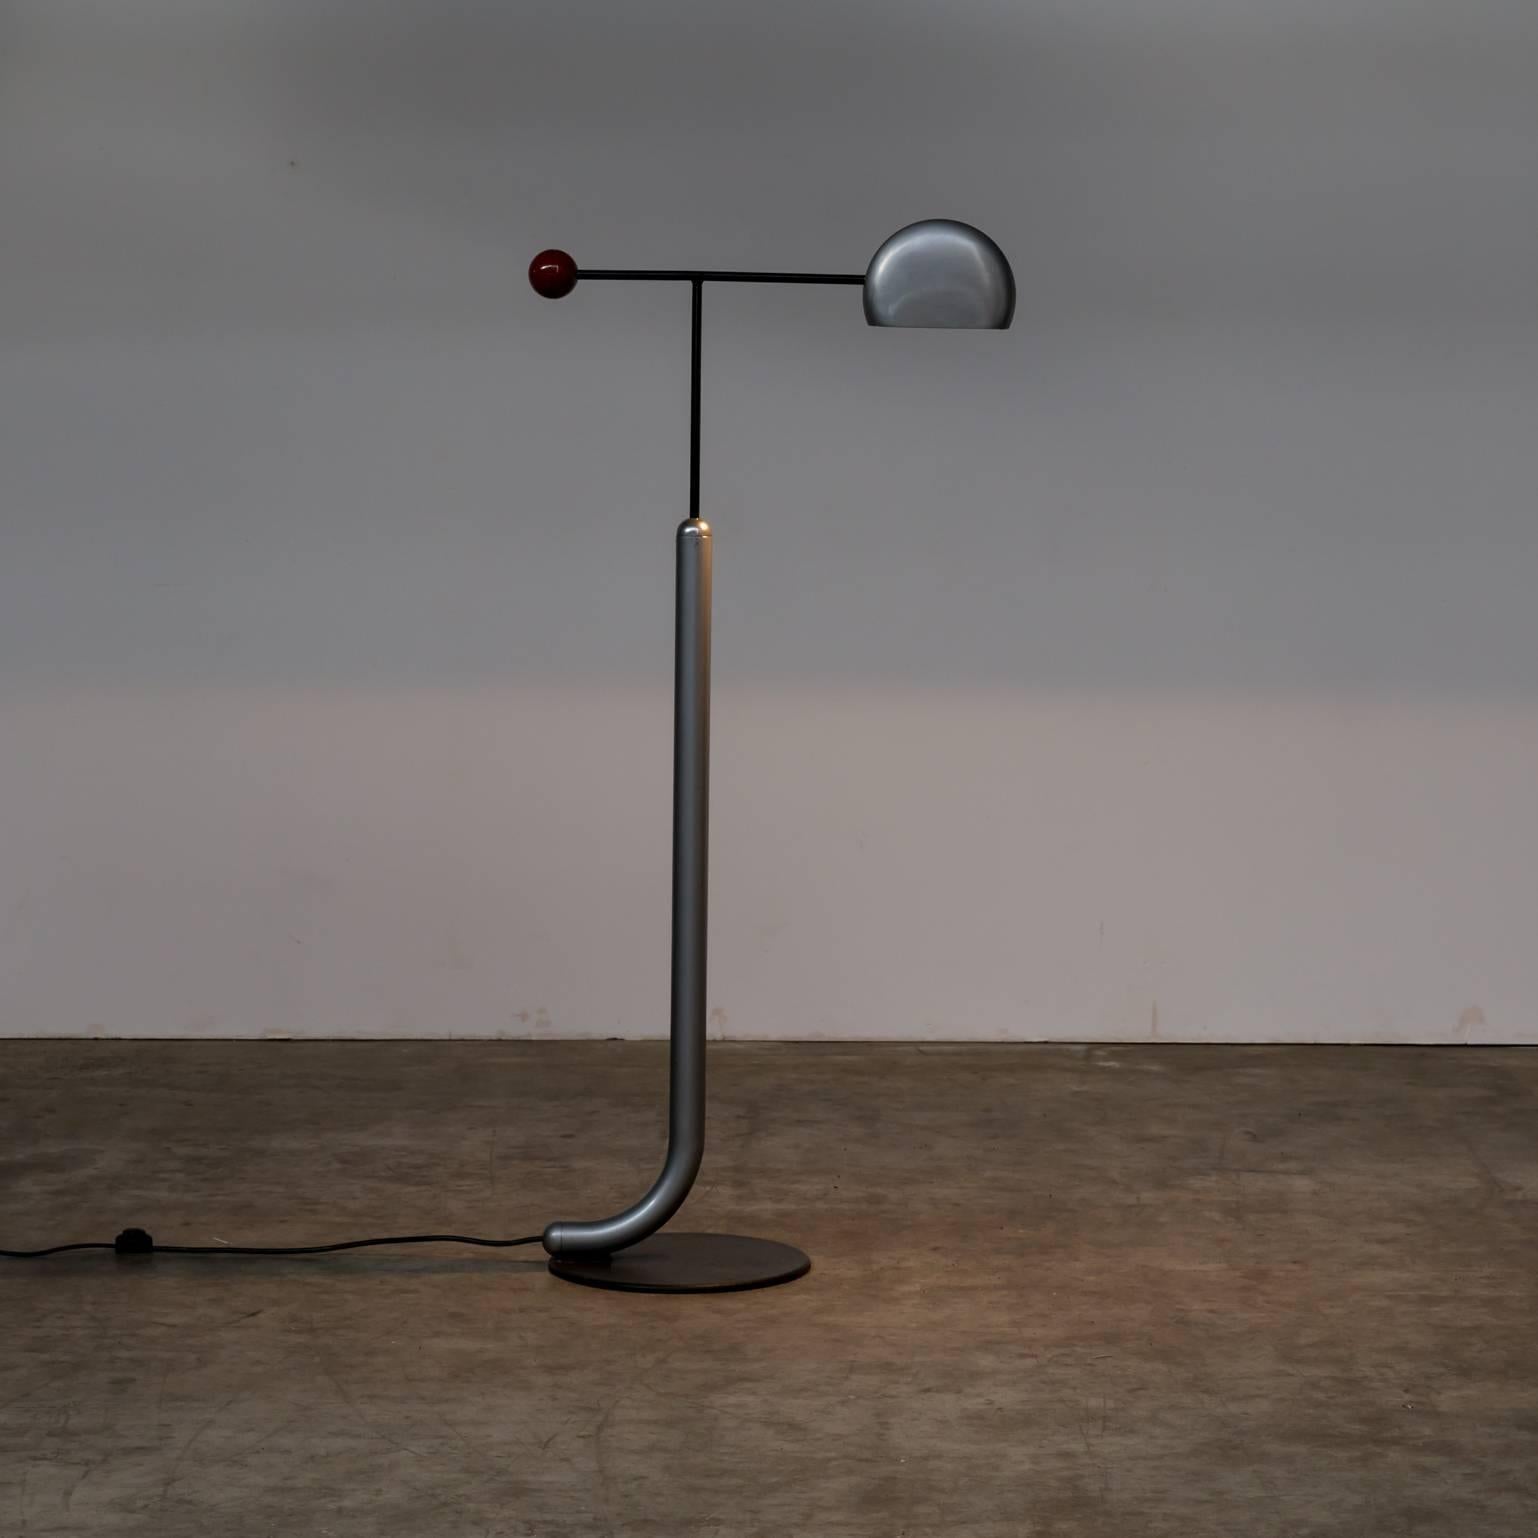 Toshiyuki Kita ‘Tomo’ floor lamp for Luci. Good and working condition, consistent with age and use.